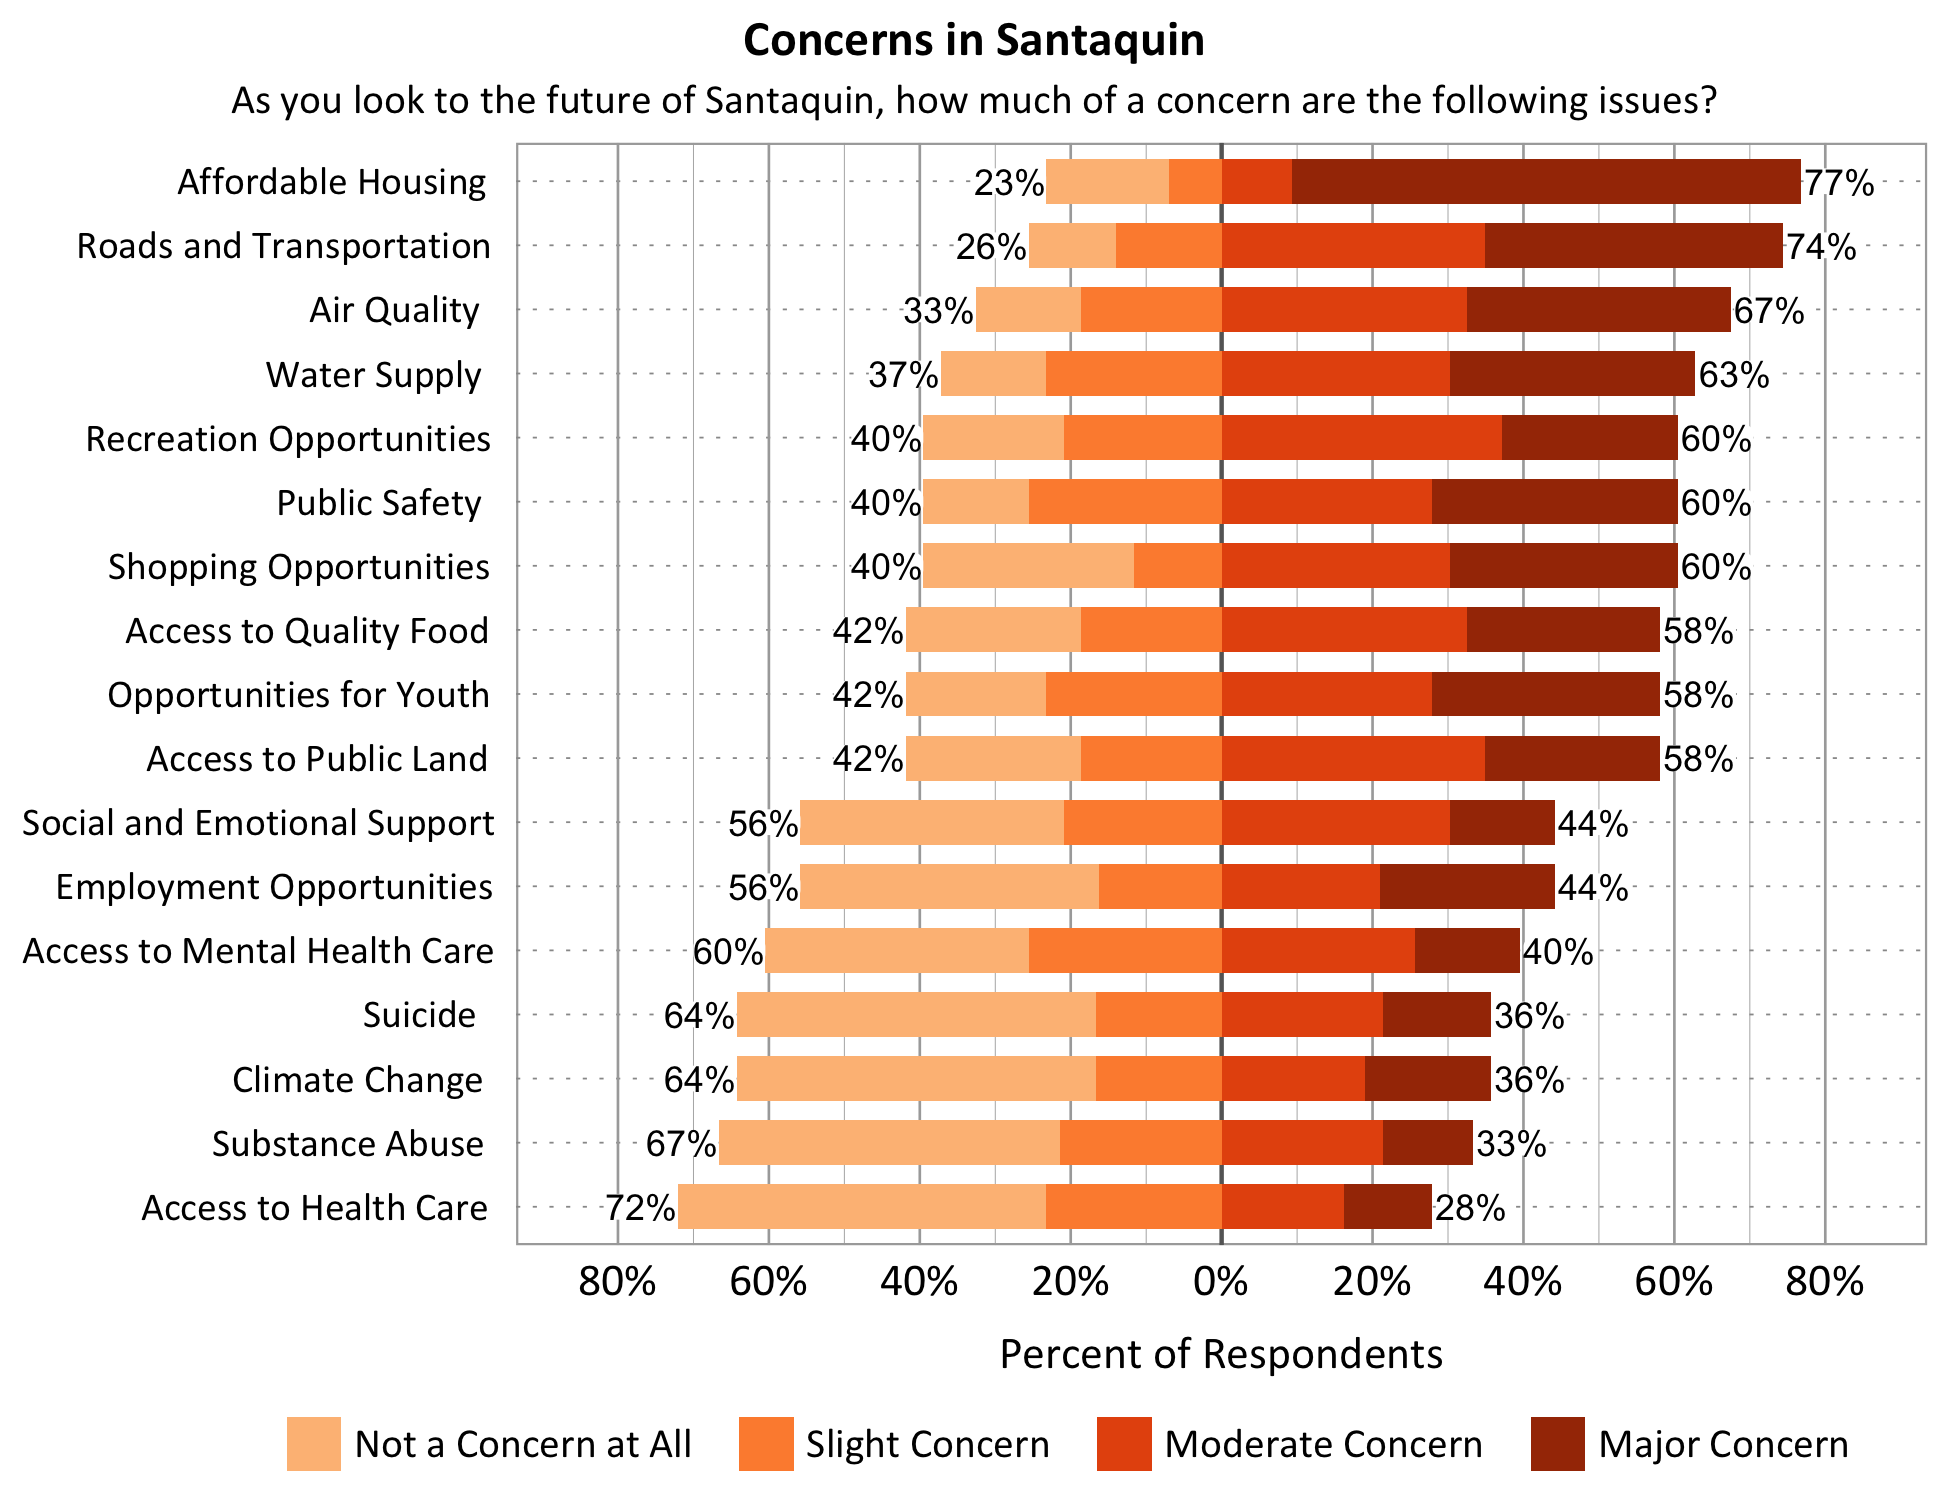 Title: Concerns in Santaquin. Subtitle: As you look to the future of Santaquin, how much of a concern are the following issues? Data – Category: Water Supply- 37% of respondents indicated not a concern at all or slight concern while 63% of respondents indicated a moderate or major concern; Category: Opportunities for Youth- 42% of respondents indicated not a concern at all or slight concern while 58% of respondents indicated a moderate or major concern; Category: Affordable Housing- 23% of respondents indicated not a concern at all or slight concern while 77% of respondents indicated a moderate or major concern; Category: Access to Public Land- 42% of respondents indicated not a concern at all or slight concern while 58% of respondents indicated a moderate or major concern; Category: Employment Opportunities- 56% of respondents indicated not a concern at all or slight concern while 44% of respondents indicated a moderate or major concern; Category: Access to Quality Food- 42% of respondents indicated not a concern at all or slight concern while 58% of respondents indicated a moderate or major concern; Category: Shopping Opportunities- 40% of respondents indicated not a concern at all or slight concern while 60% of respondents indicated a moderate or major concern; Category: Recreation Opportunities- 40% of respondents indicated not a concern at all or slight concern while 60% of respondents indicated a moderate or major concern; Category: Substance Abuse- 67% of respondents indicated not a concern at all or slight concern while 33% of respondents indicated a moderate or major concern; Category: Roads and Transportation- 26% of respondents indicated not a concern at all or slight concern while 74% of respondents indicated a moderate or major concern; Category: Social and Emotional Support- 56% of respondents indicated not a concern at all or slight concern while 44% of respondents indicated a moderate or major concern; Category: Access to Health Care- 72% of respondents indicated not a concern at all or slight concern while 28% of respondents indicated a moderate or major concern; Category: Public Safety- 40% of respondents indicated not a concern at all or slight concern while 60% of respondents indicated a moderate or major concern; Category: Access to Mental Health Care - 60% of respondents indicated not a concern at all or slight concern while 40% of respondents indicated a moderate or major concern; Category: Air Quality- 33% of respondents indicated not a concern at all or slight concern while 67% of respondents indicated a moderate or major concern. Climate Change- 64% of respondents indicated not a concern at all or slight concern while 36% of respondents indicated a moderate or major concern.